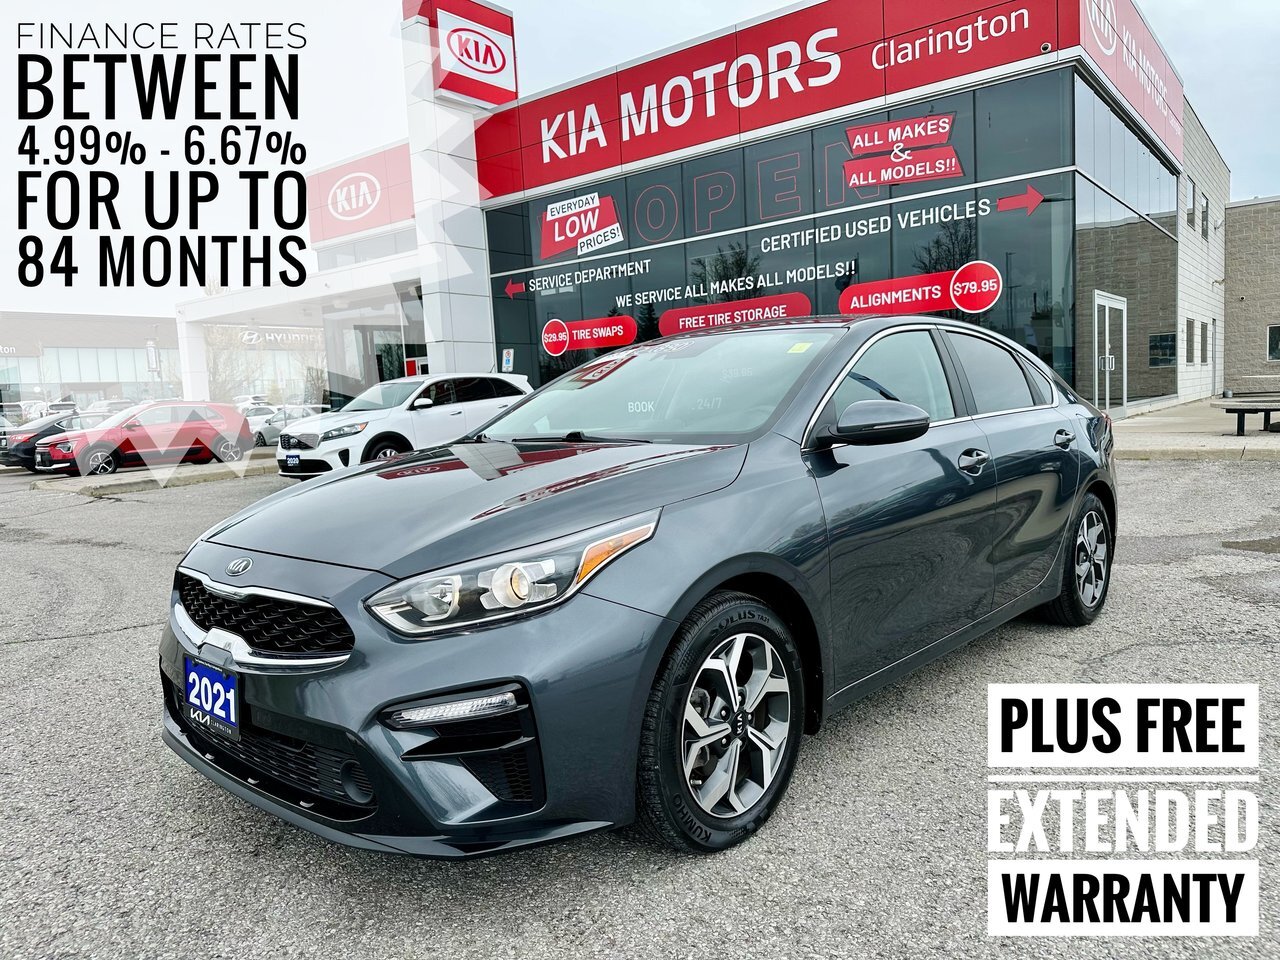 2021 Kia Forte EX Certified Pre-Owned